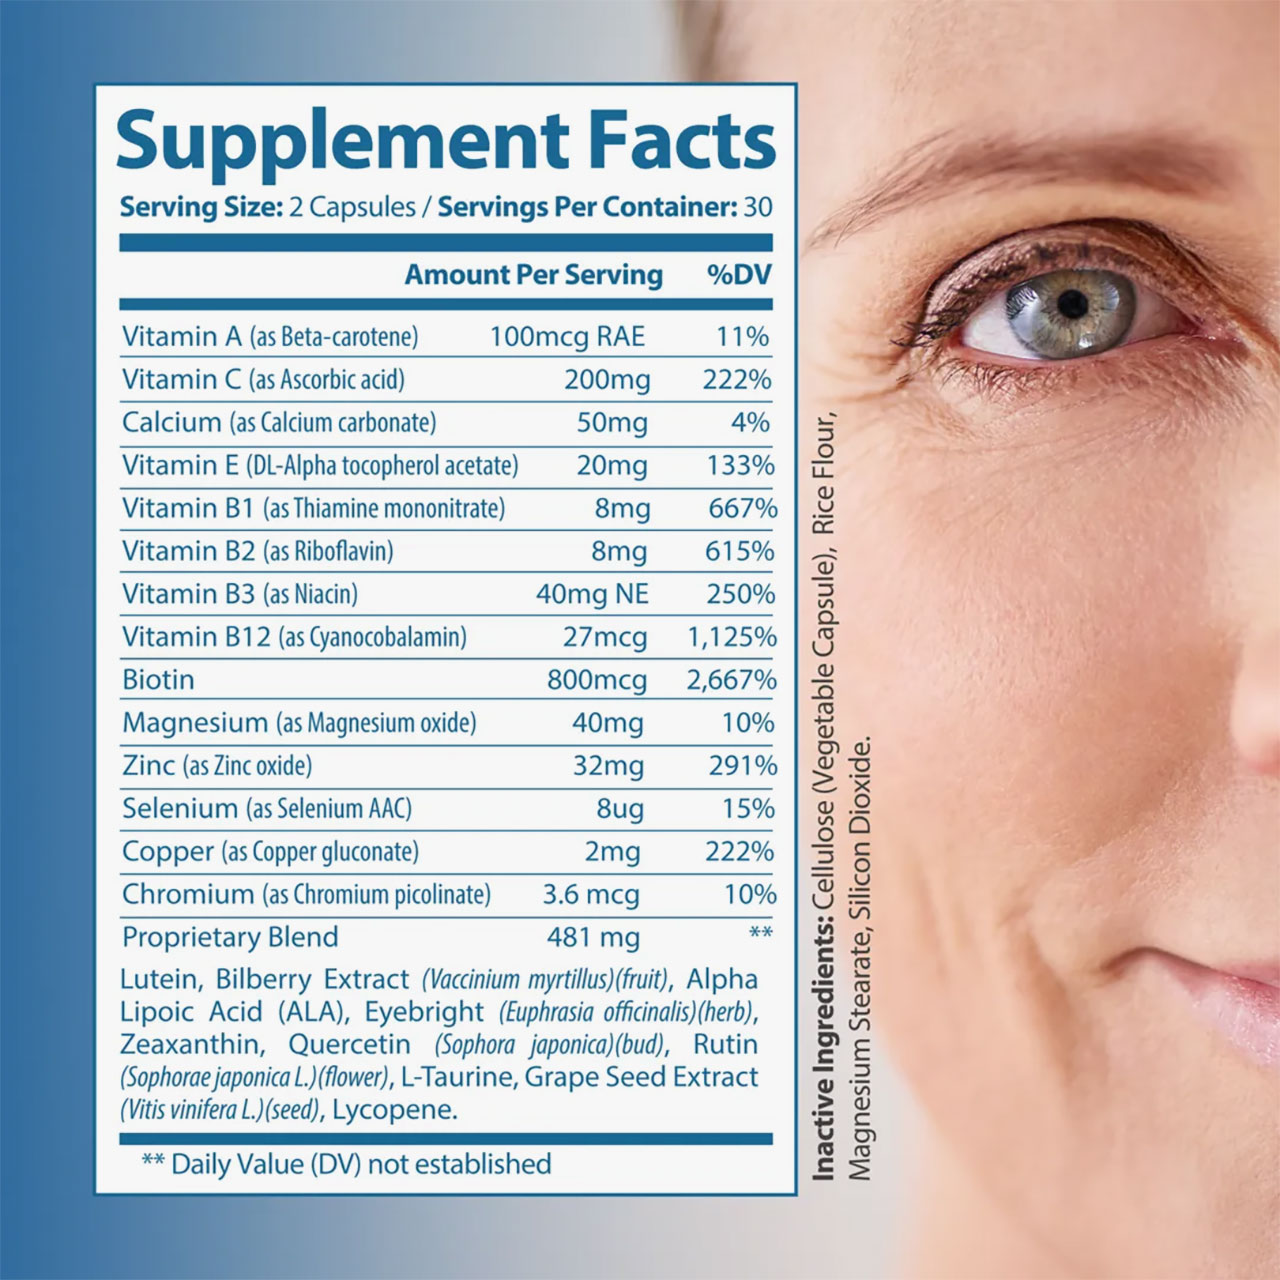 Natural Eye Health and Vision Support Vitamins Supplement Facts Label